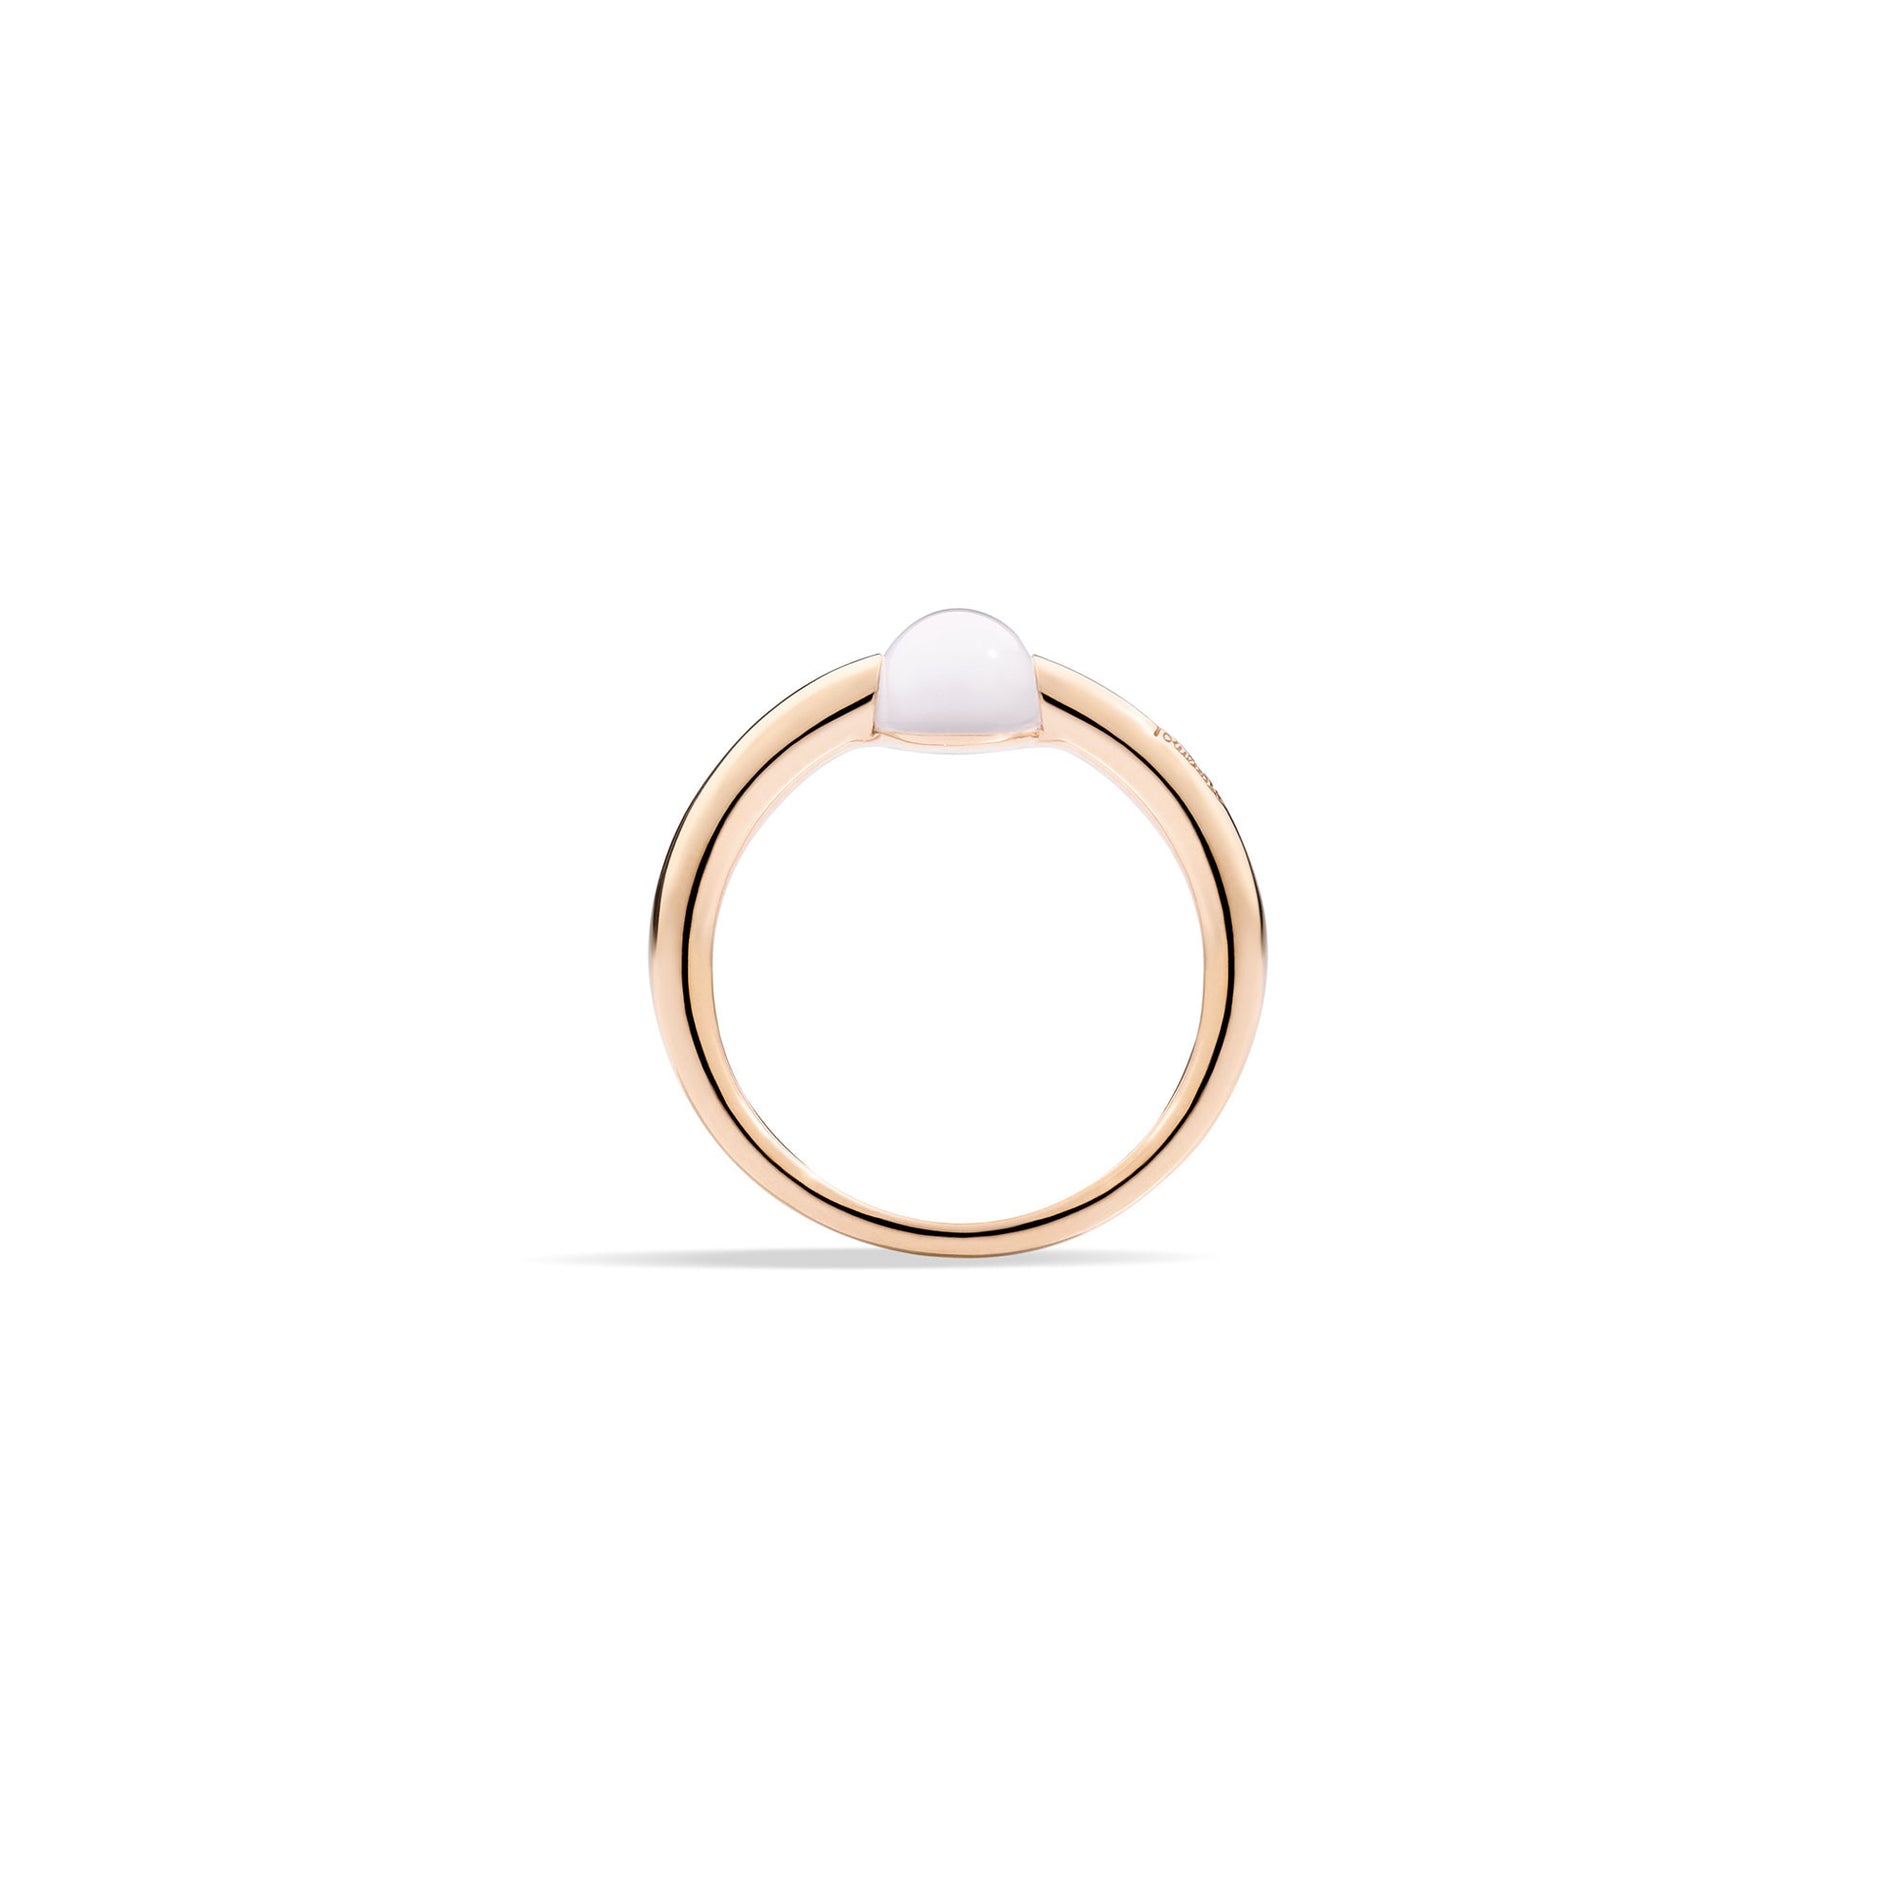 M'ama non M'ama Ring in 18k Rose Gold with Moonstone - Orsini Jewellers NZ